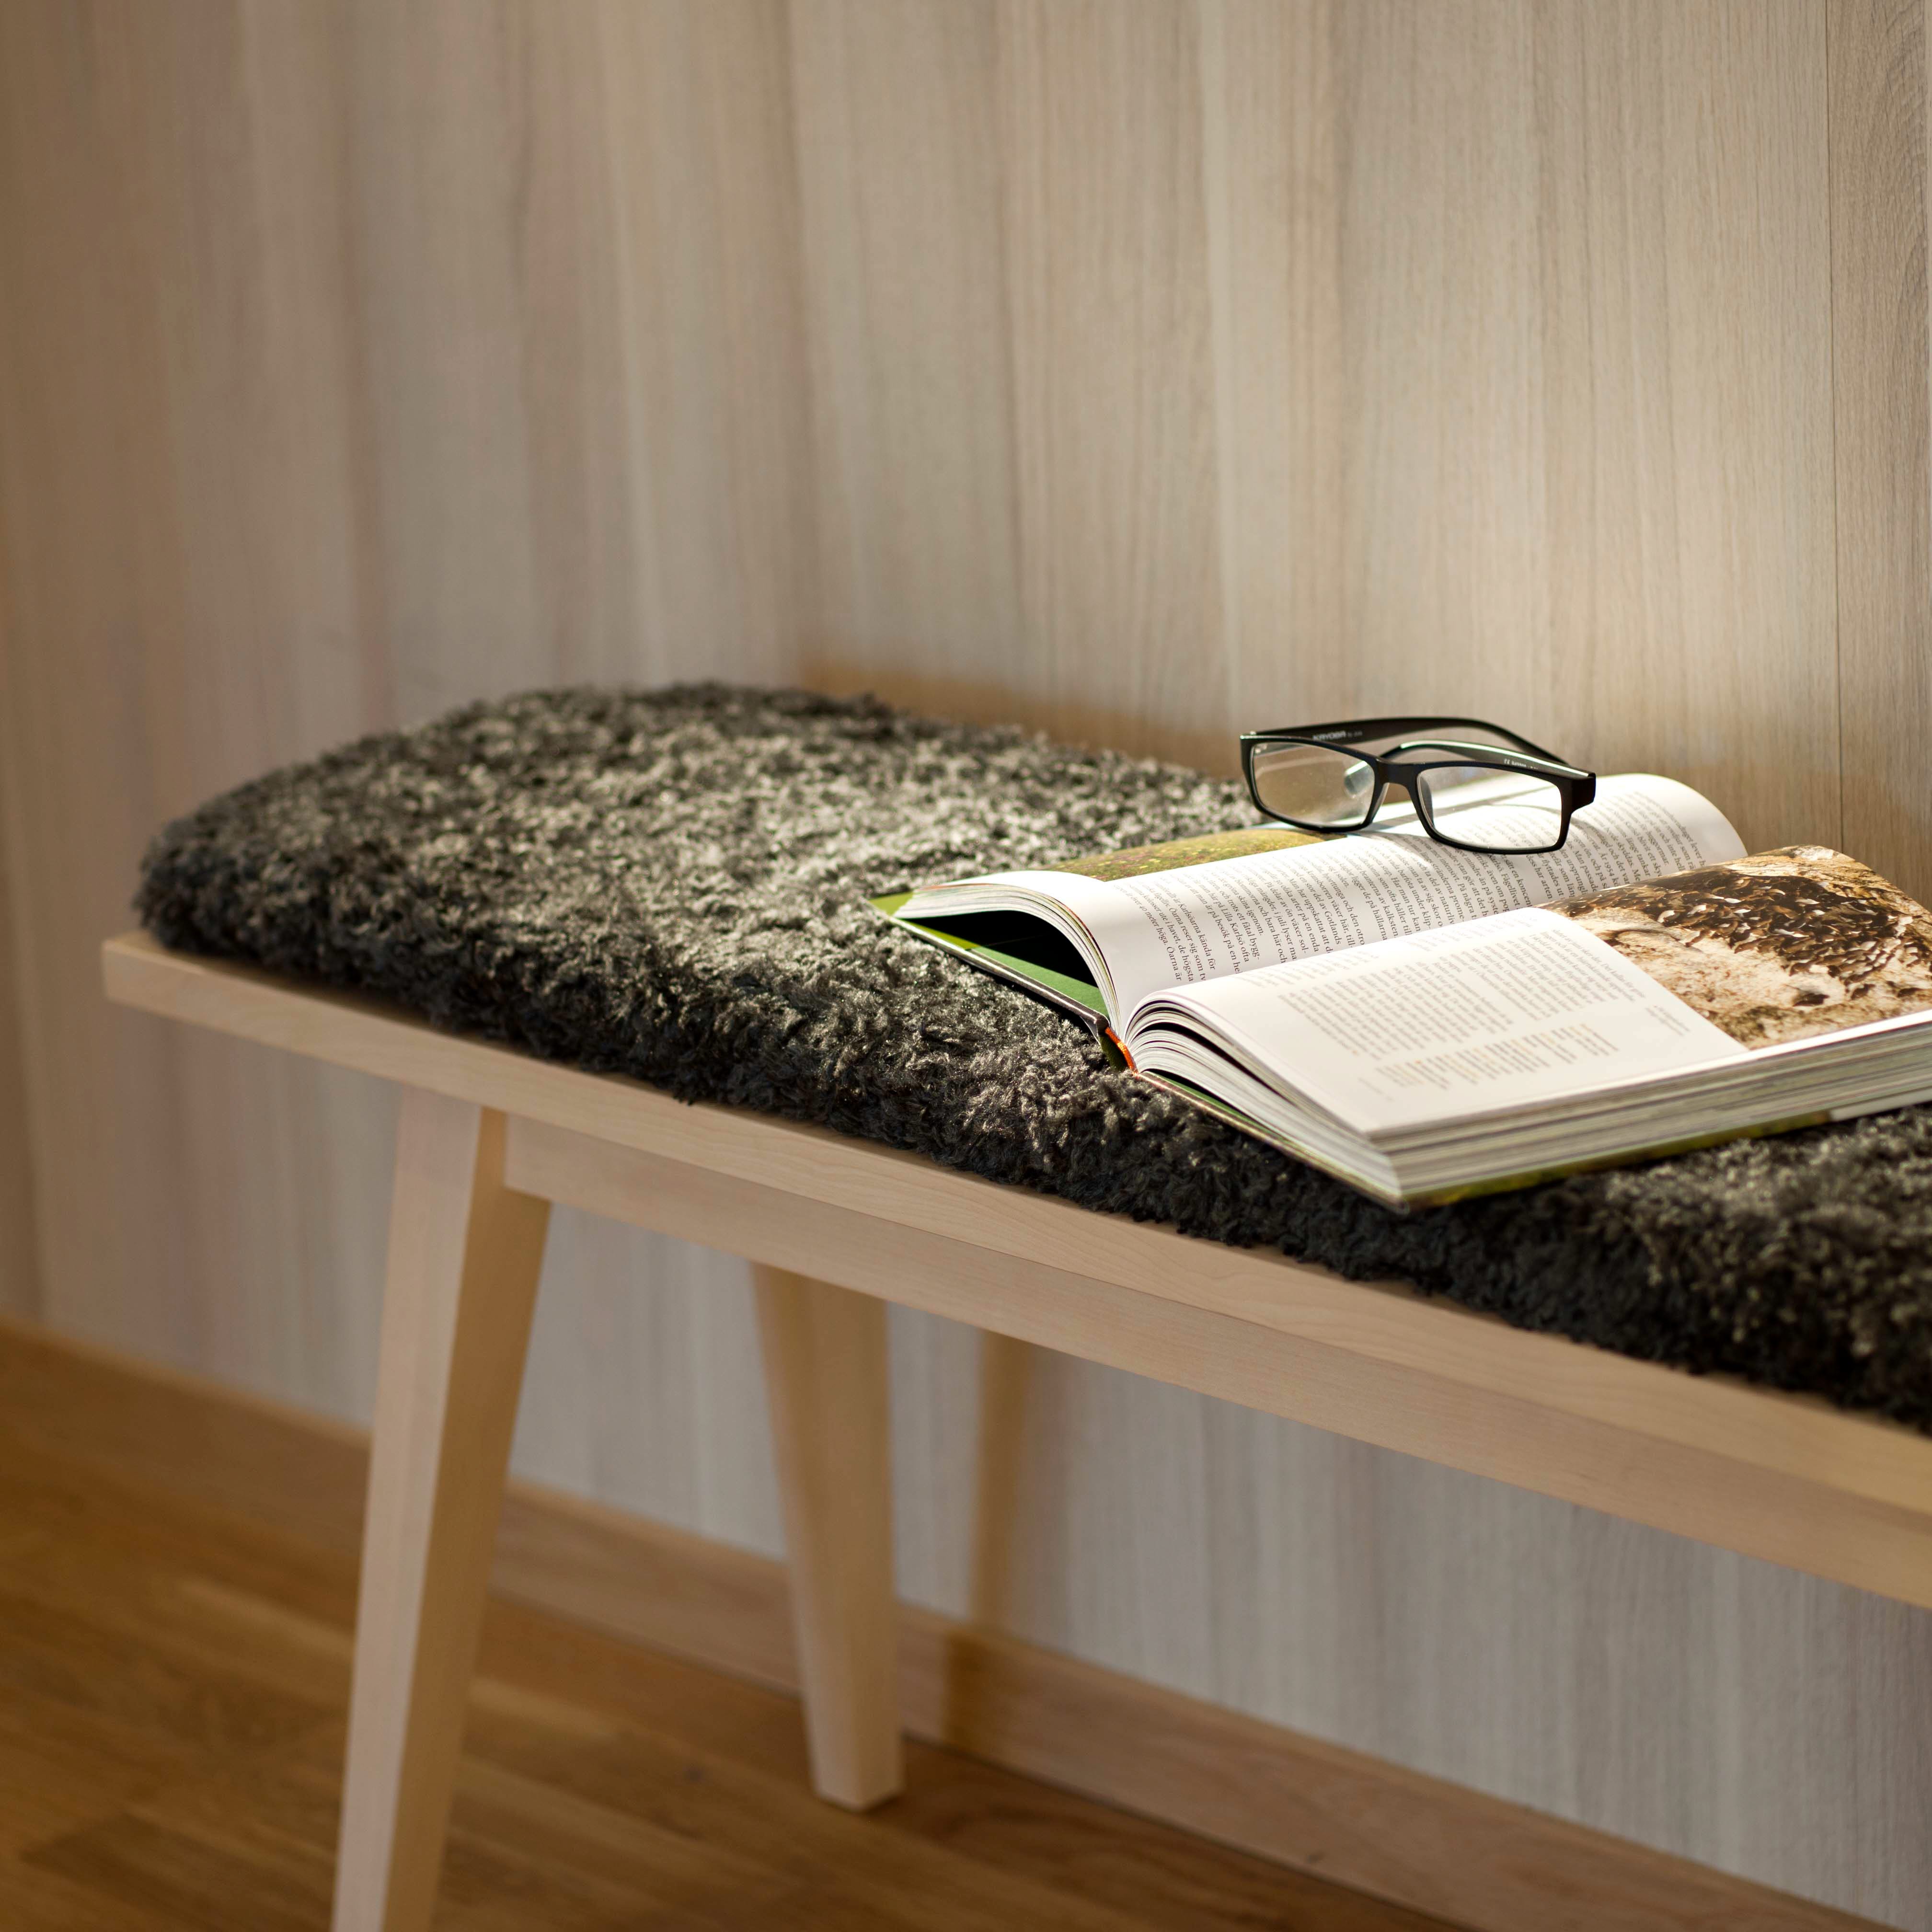 A bench with a book and a pair of reading glasses